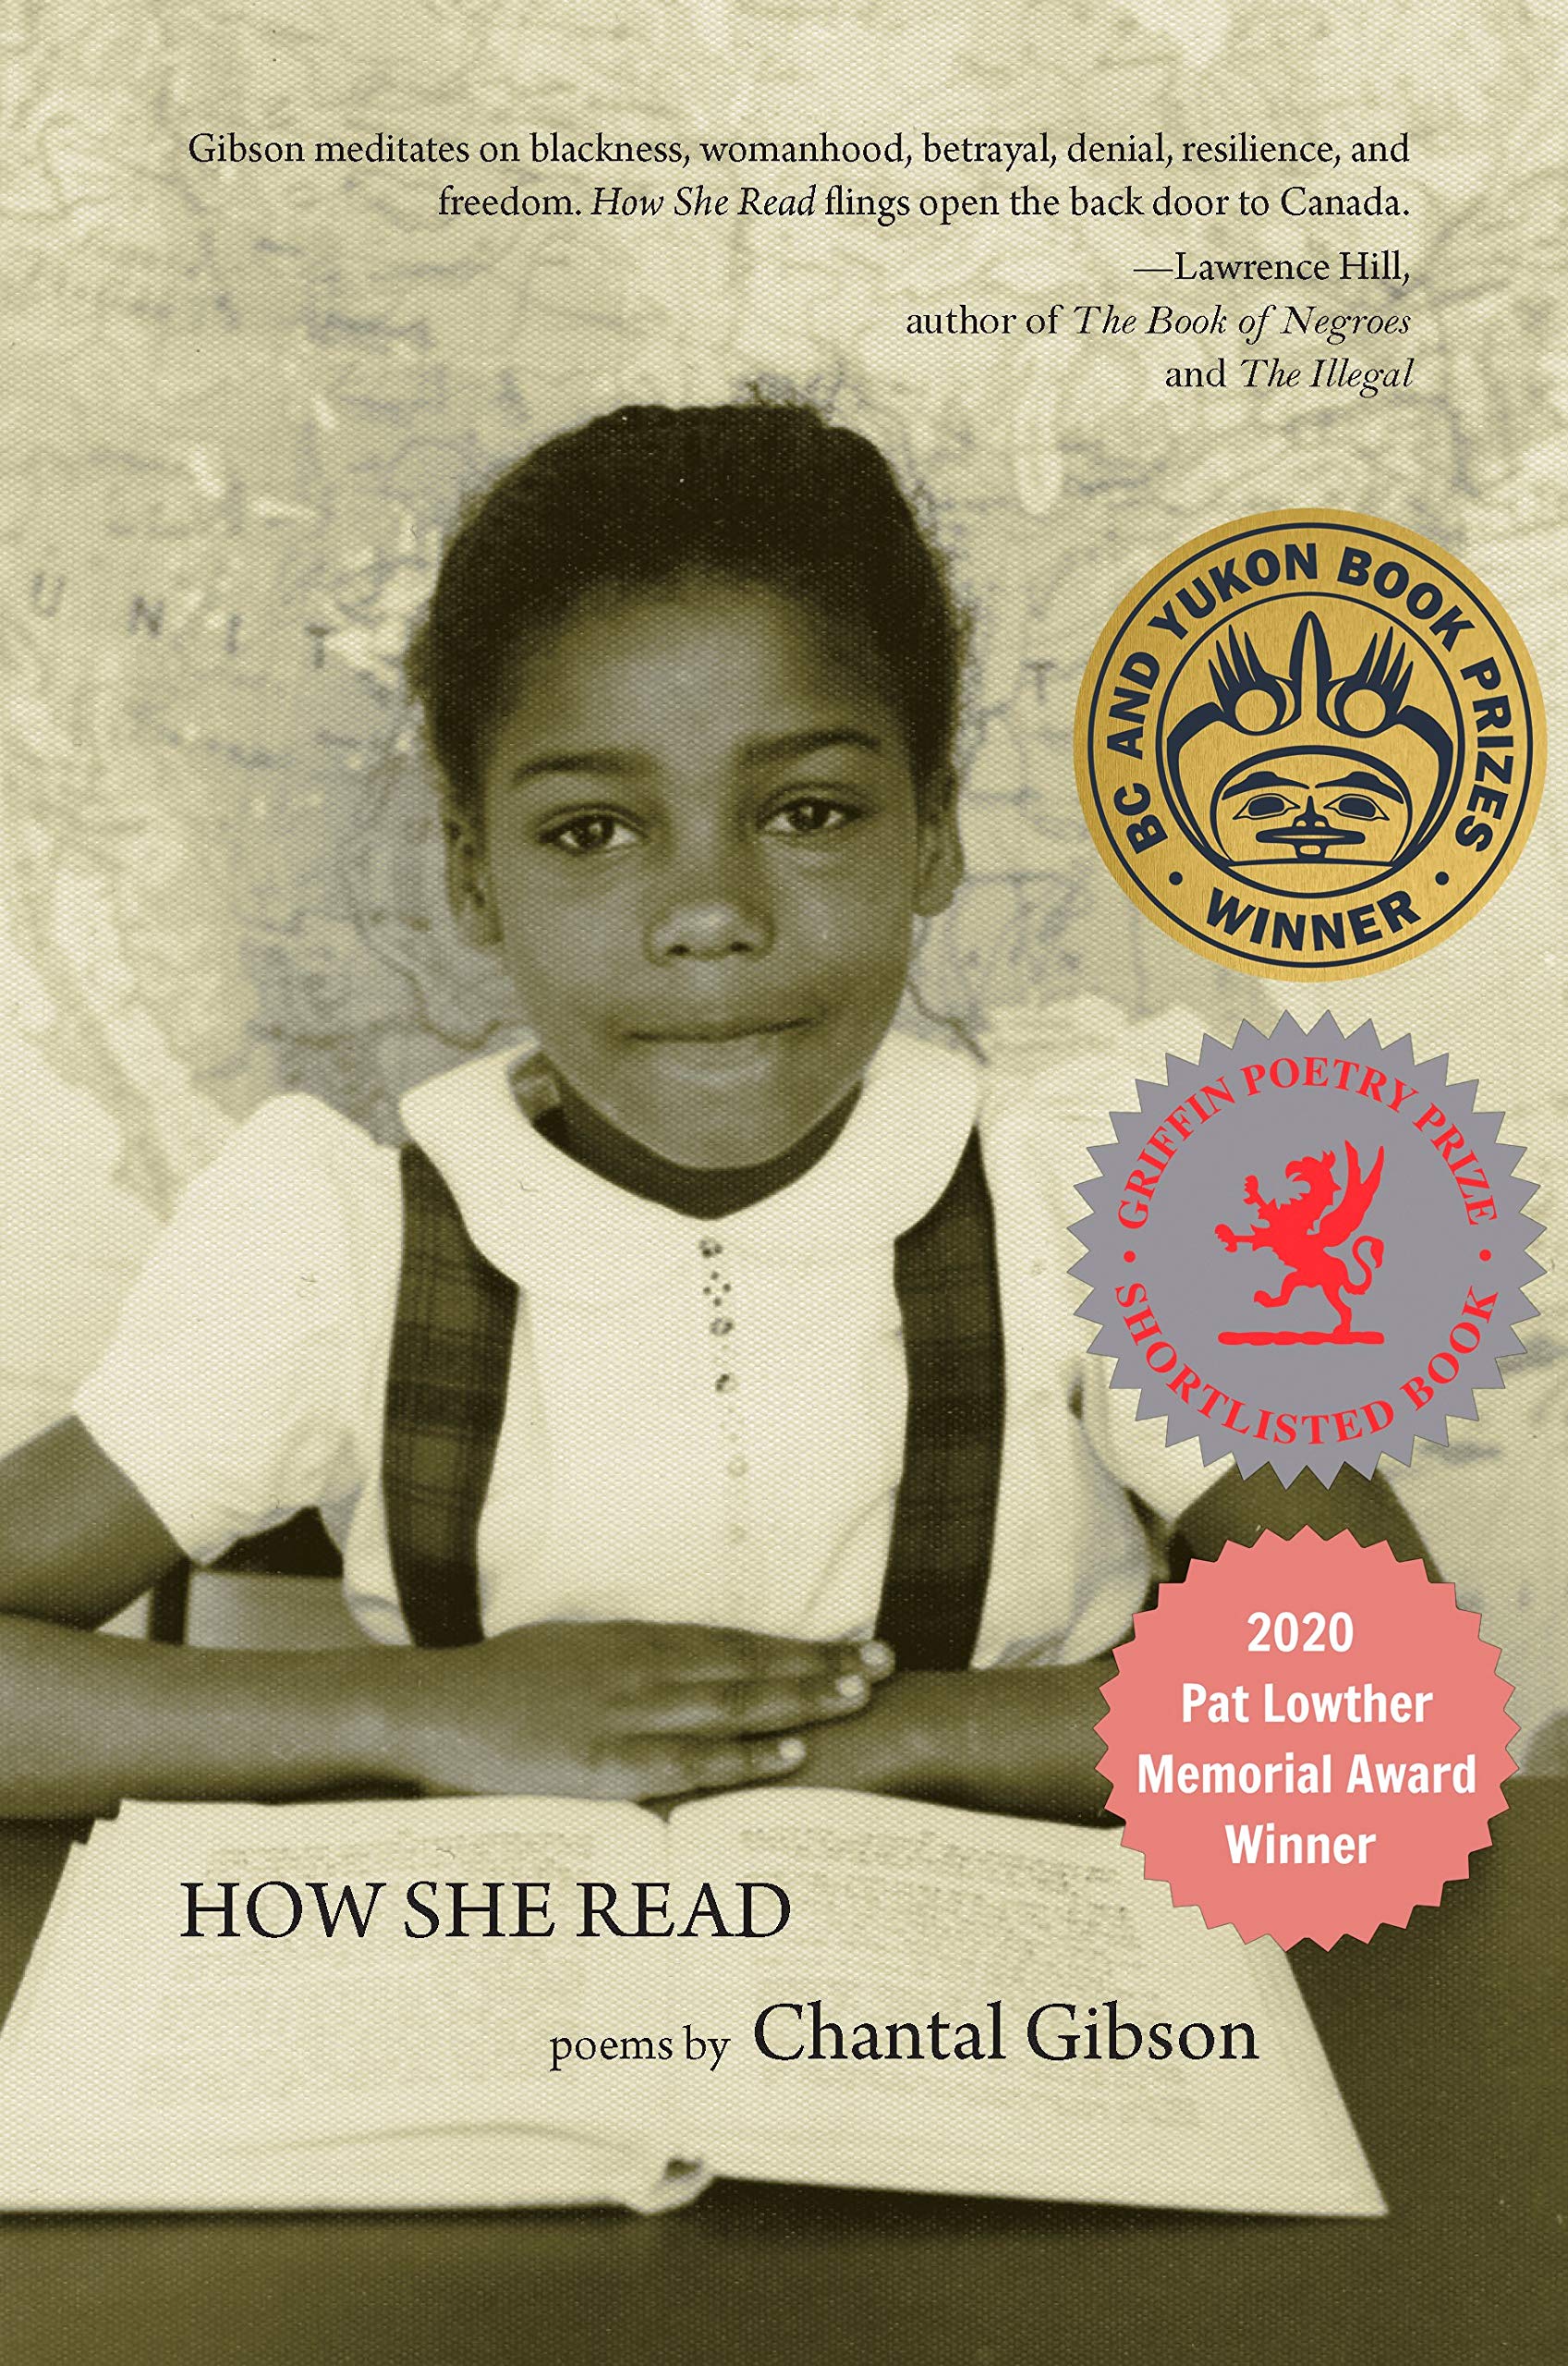 The cover of How She Read